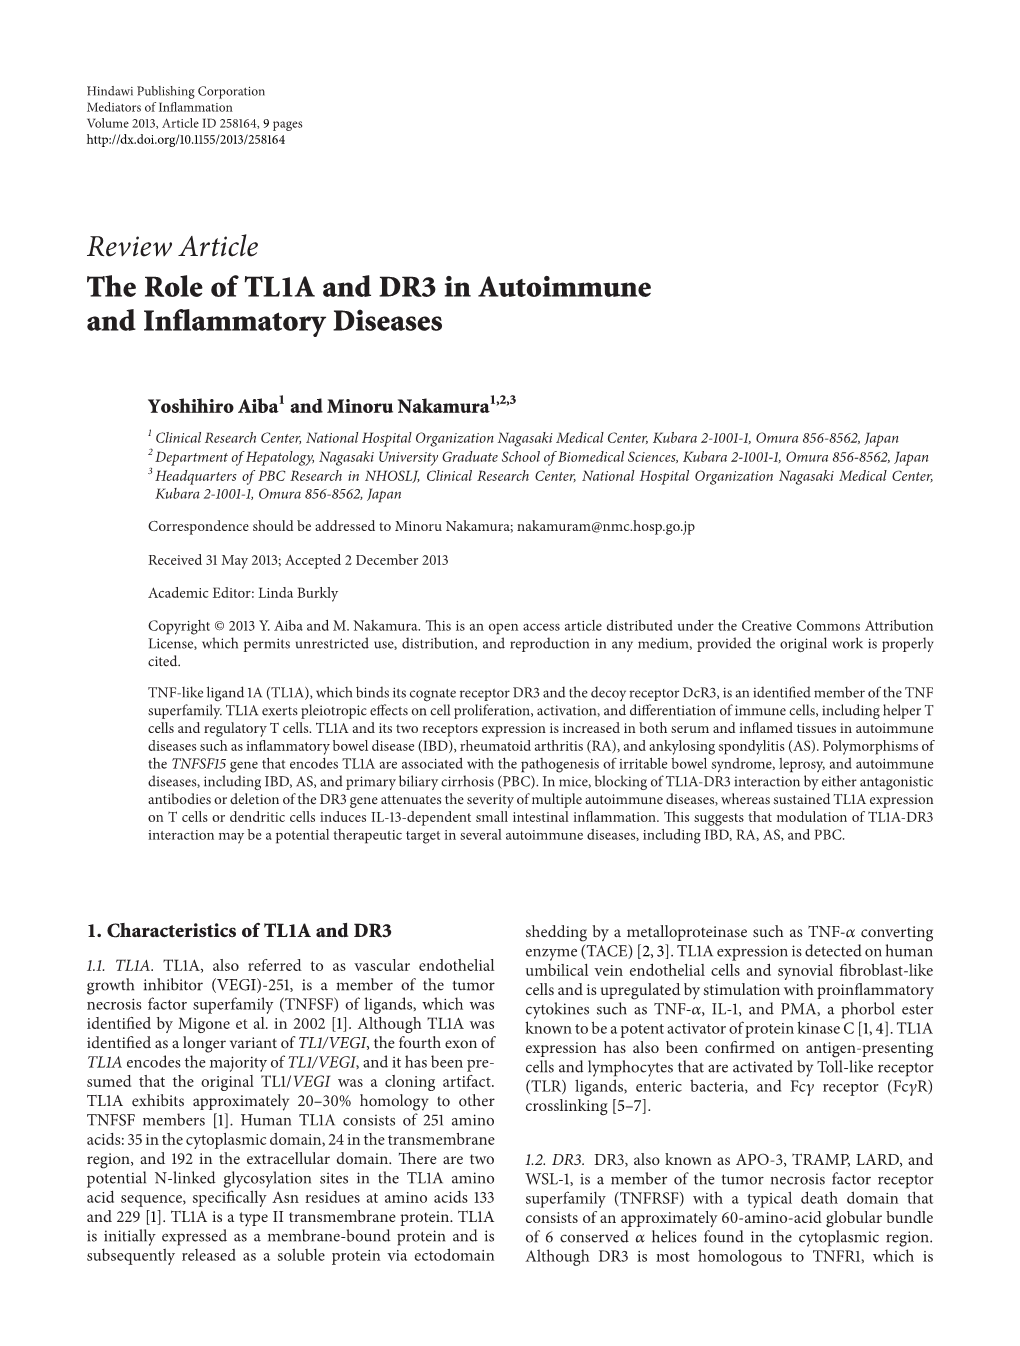 The Role of TL1A and DR3 in Autoimmune and Inflammatory Diseases